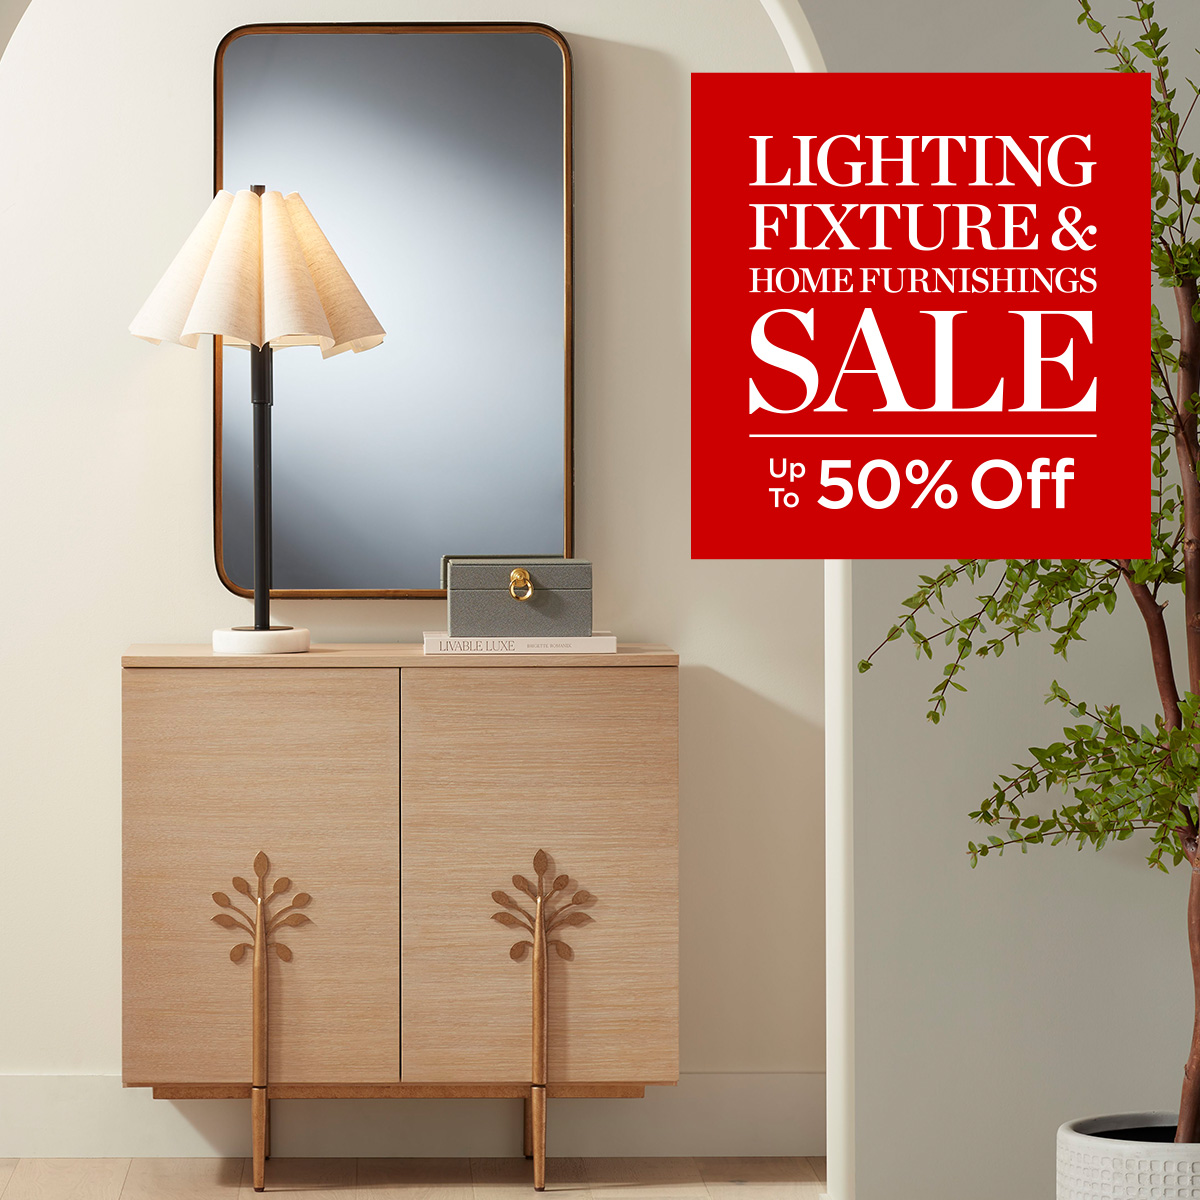 The Lighting Fixture & Home Furnishings Sale ends next week! Save up to 50% off lighting and furniture for indoor and outdoor spaces 💡

Visit your local store, or shop online: bit.ly/3F21dzh

#myLampsPlus #lightingsale #furnituresale #sale #homelighting #homedecor #home